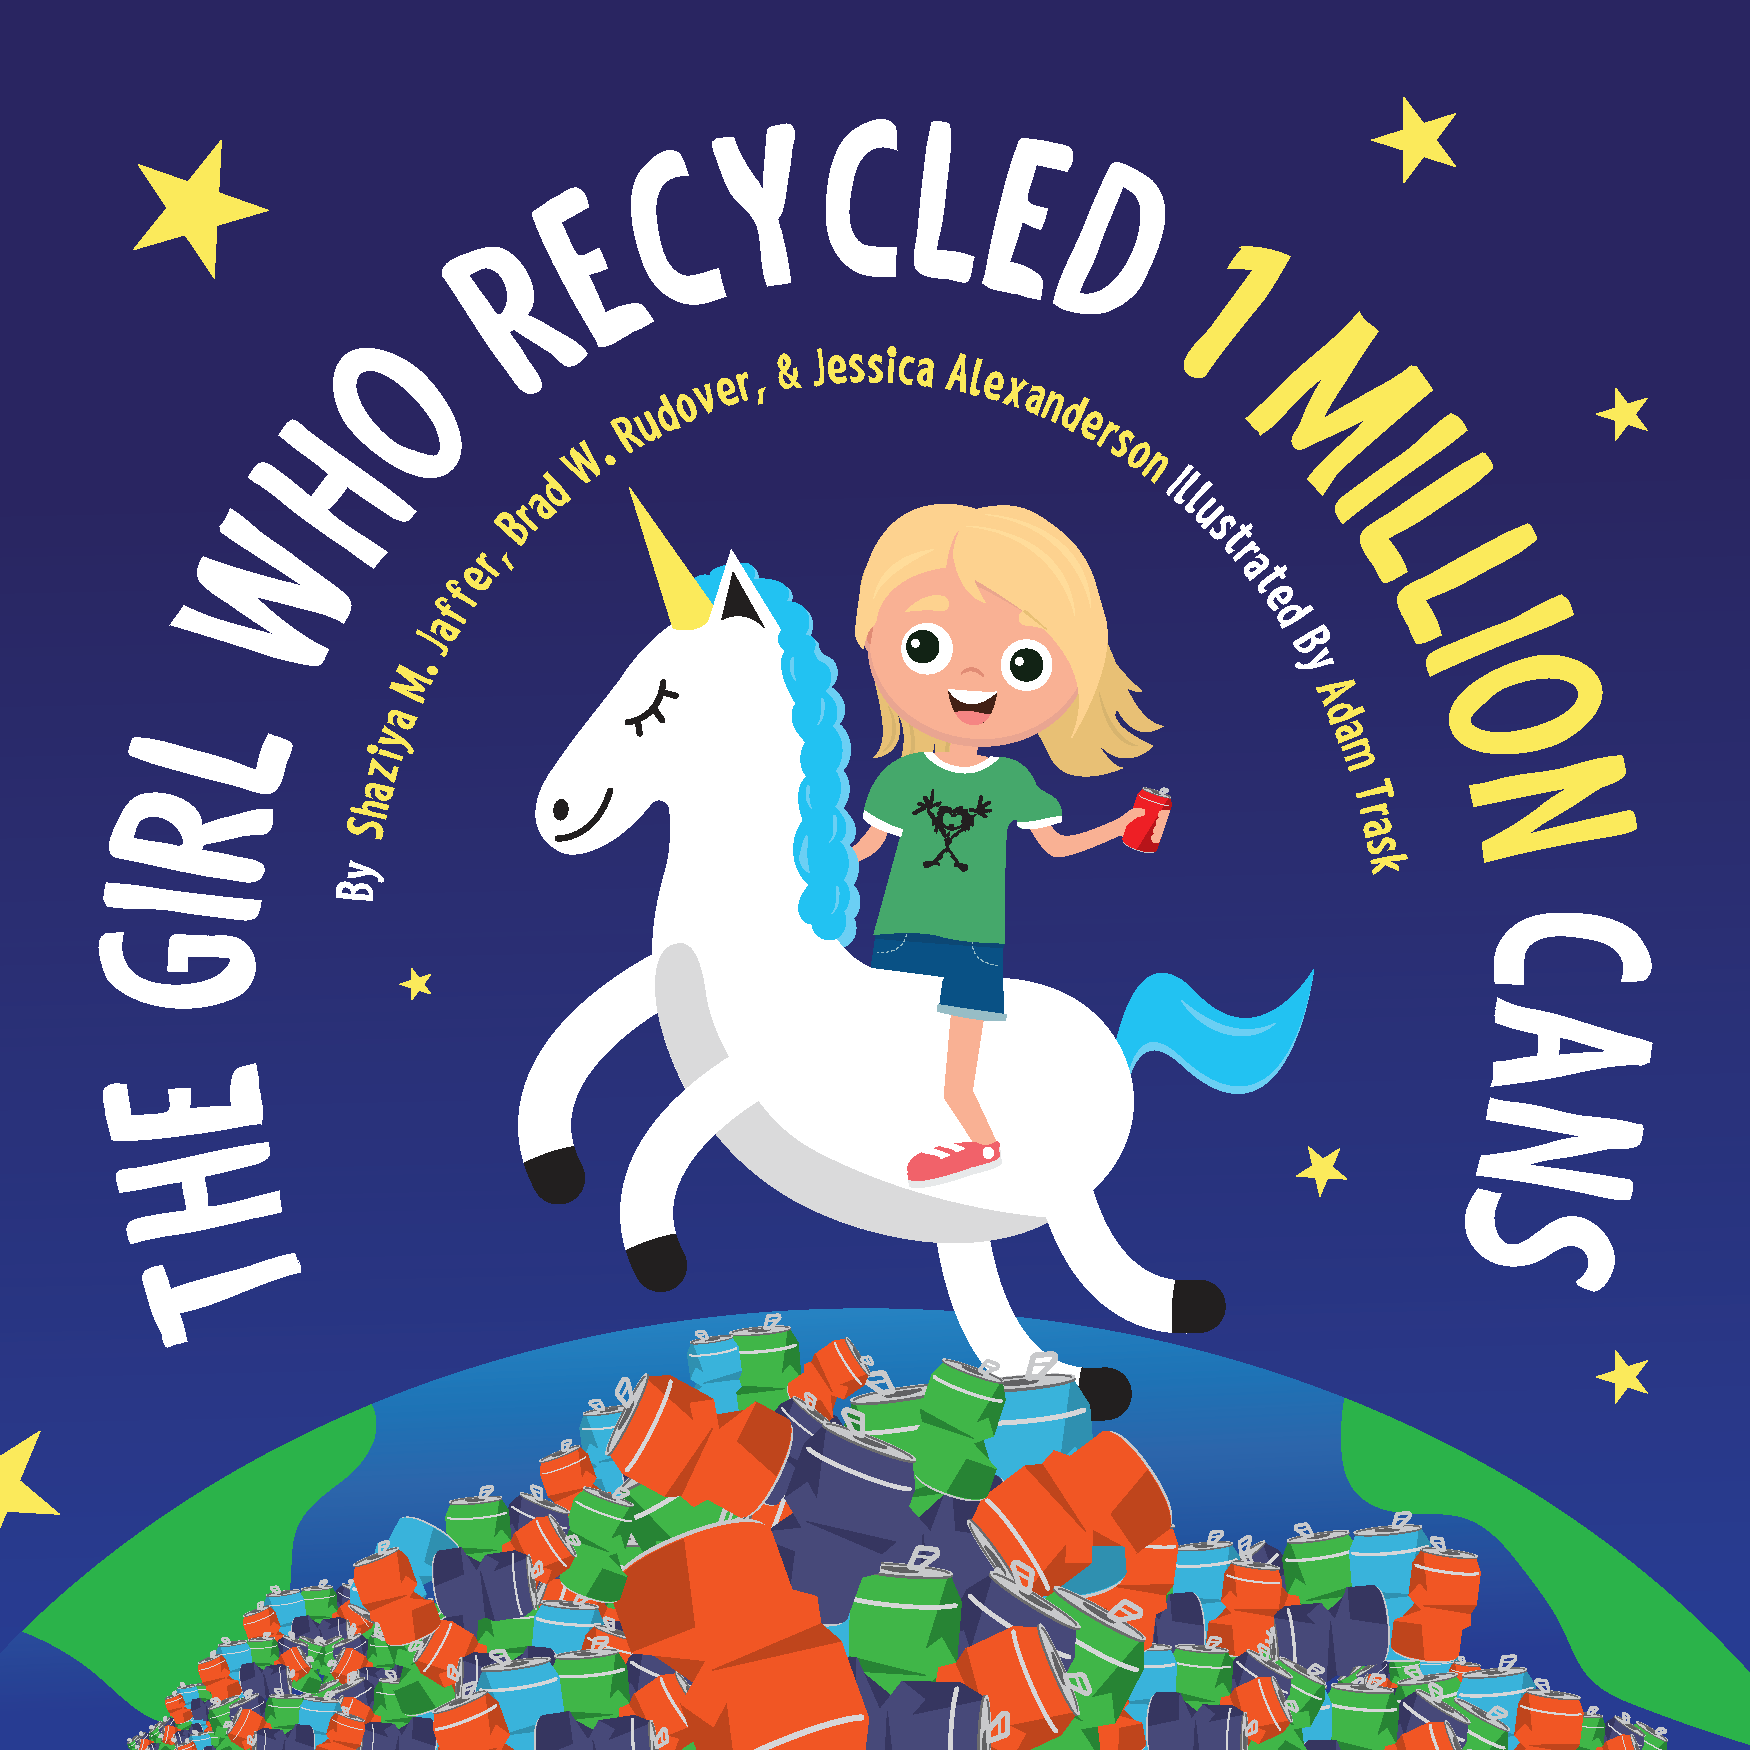 1 M Cans spreads front cover Page 01 Let's Make Recycling Fun and Easy for Kids